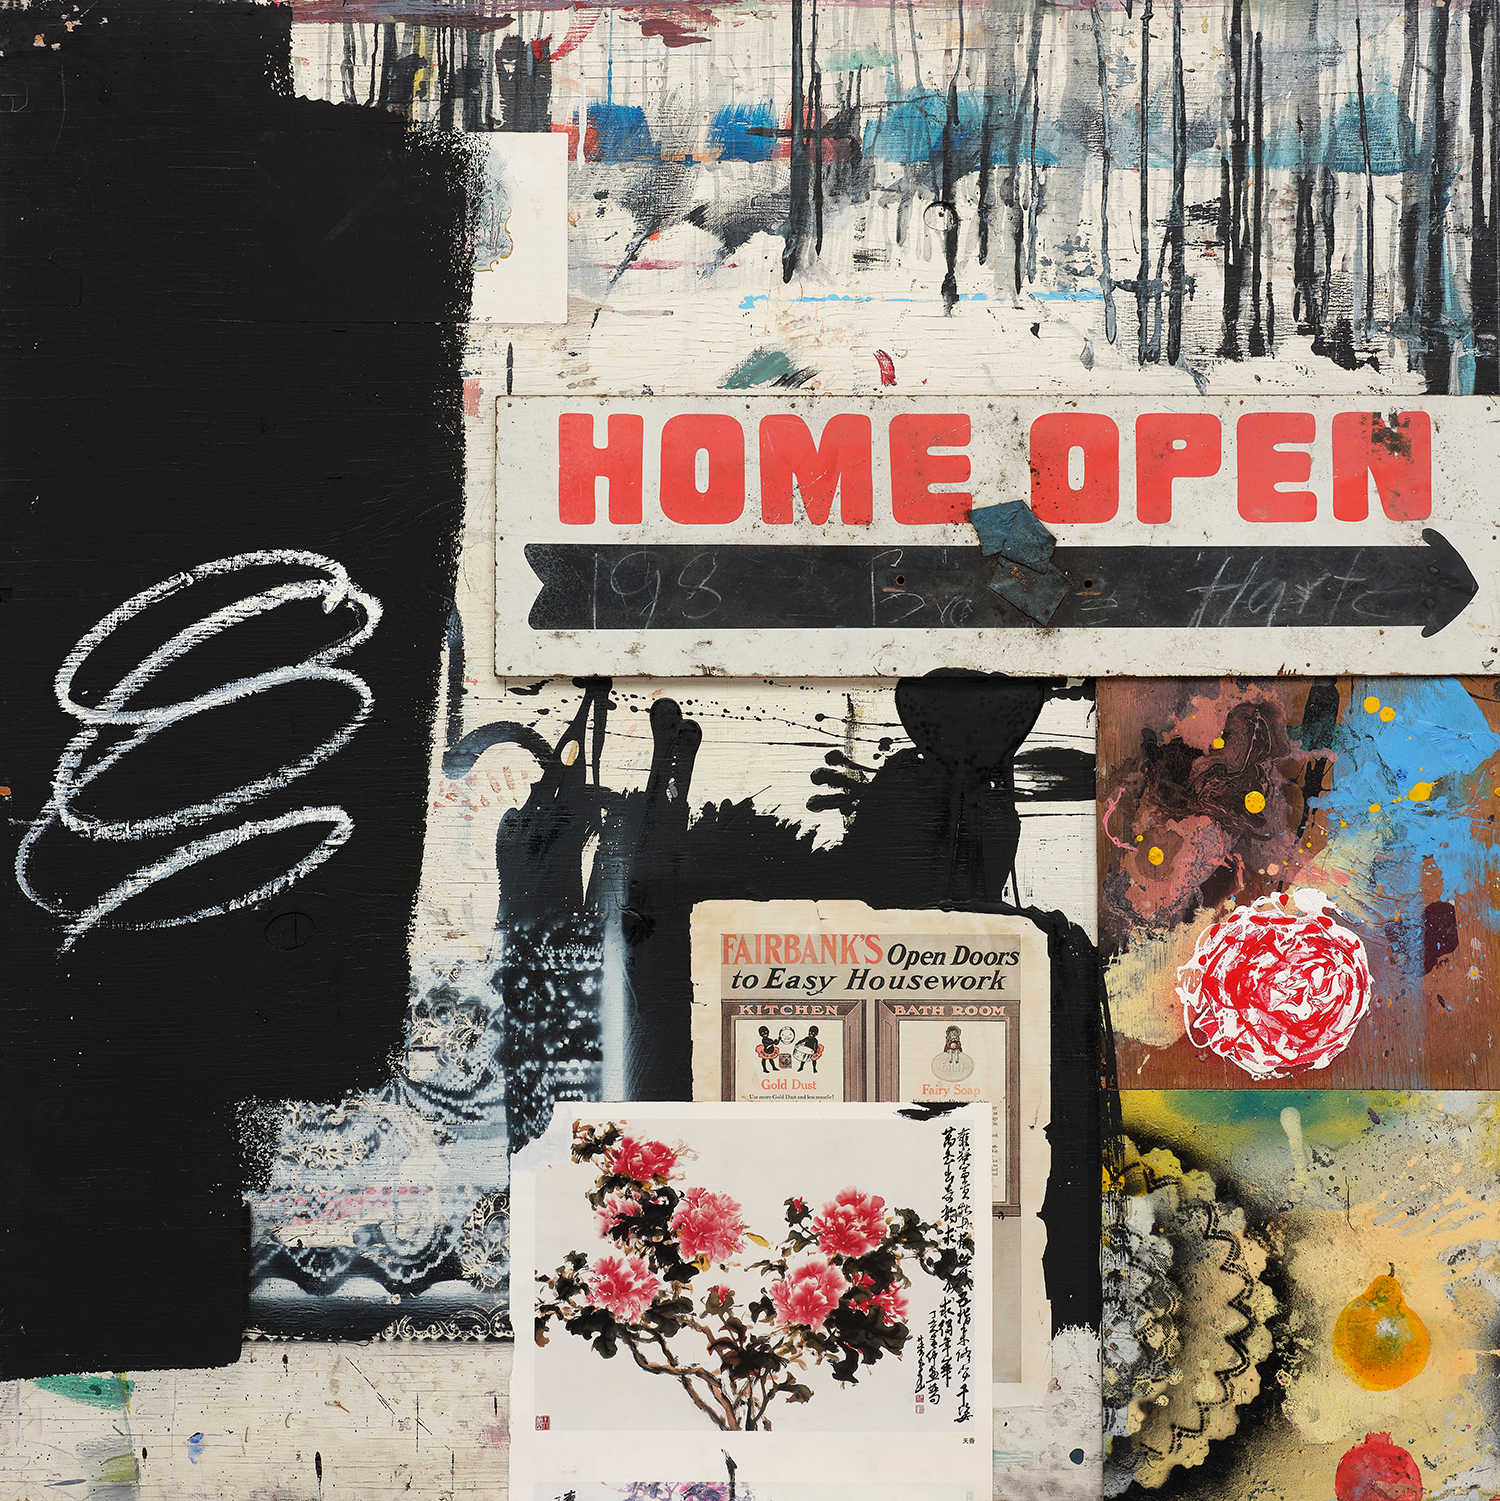 Collaged artwork with "home open" sign, flowers and advertisements